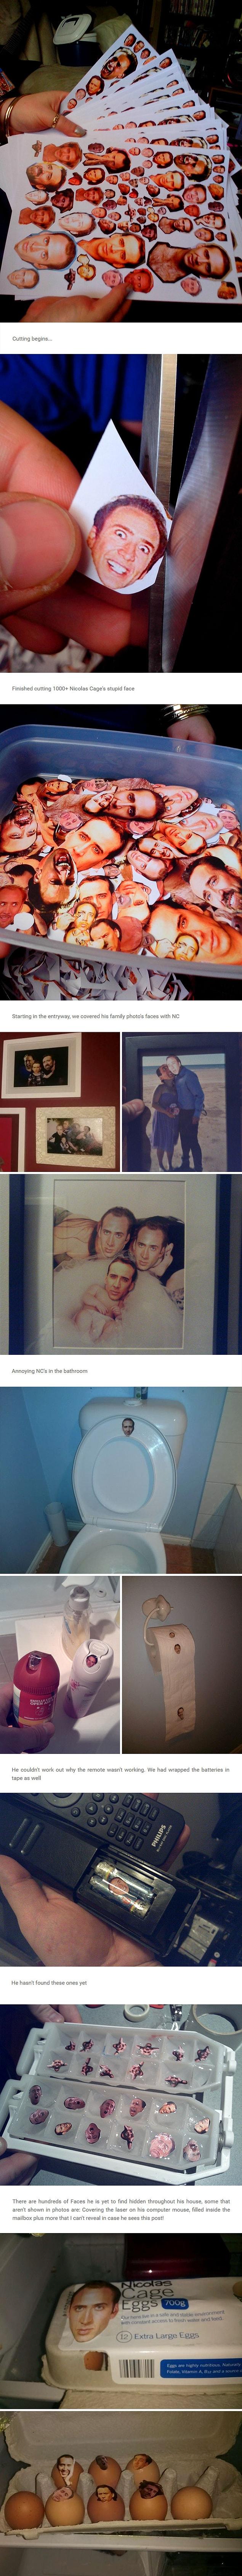 18. So My Brother Thinks Nicolas Cage Is A Big D-Bag. We Have A History Of Pranking Each Other In Ridiculous Ways, So My Gf And I Came Up With The Idea